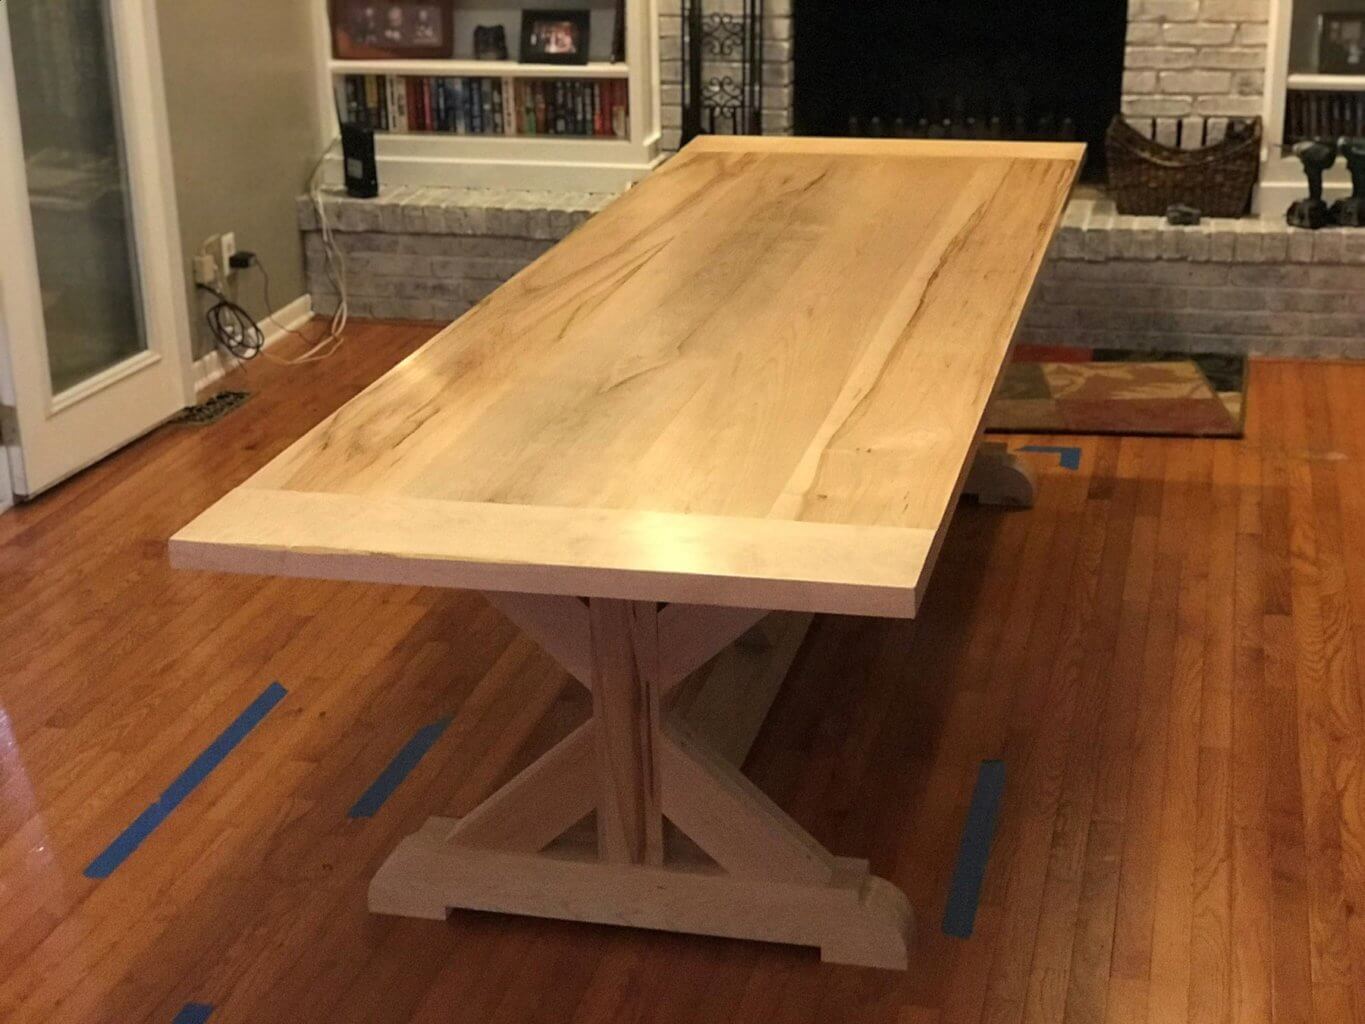 Maple Dining Room Table With Leaf